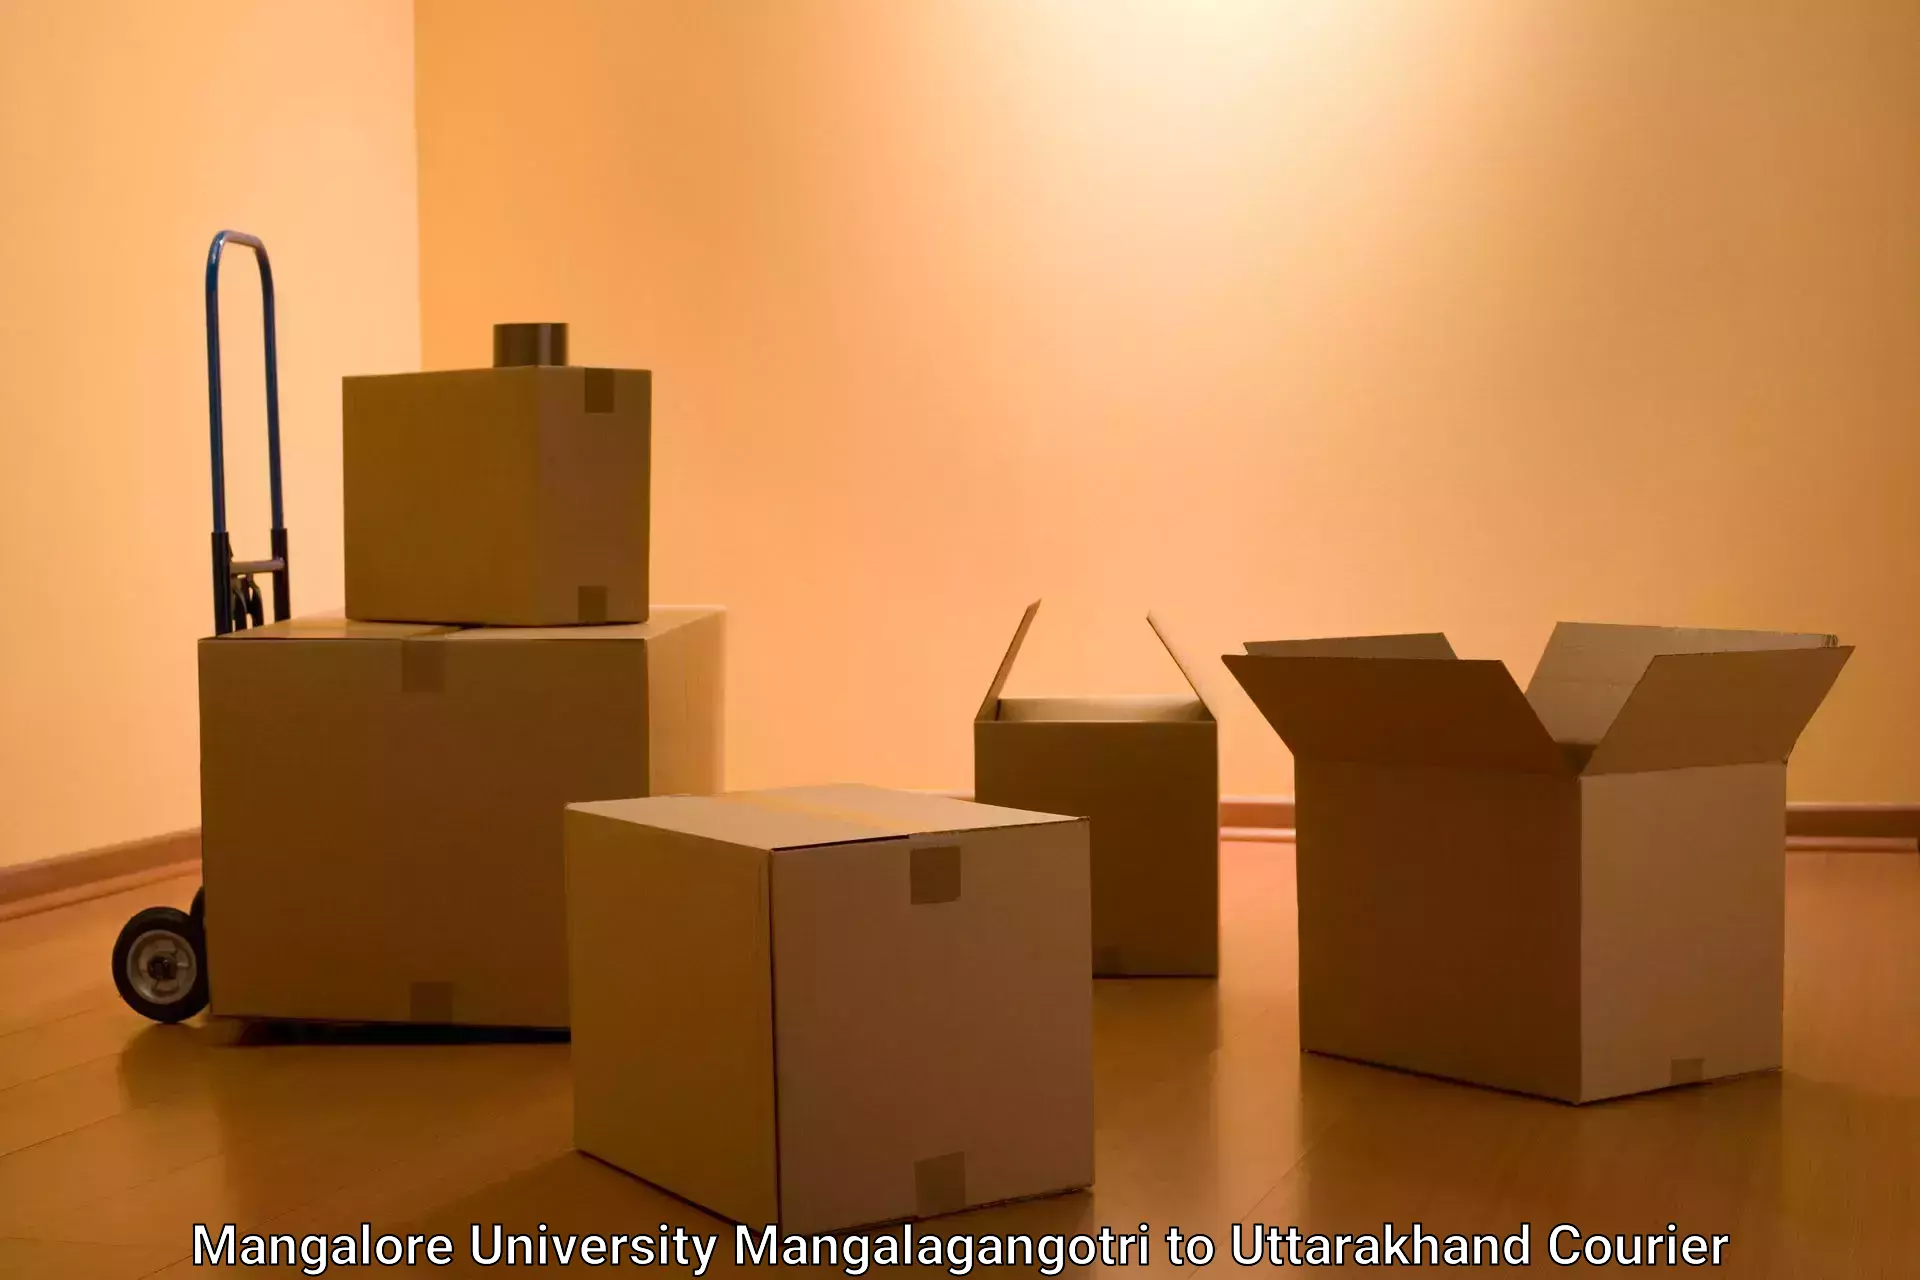 High-quality delivery services in Mangalore University Mangalagangotri to Lansdowne